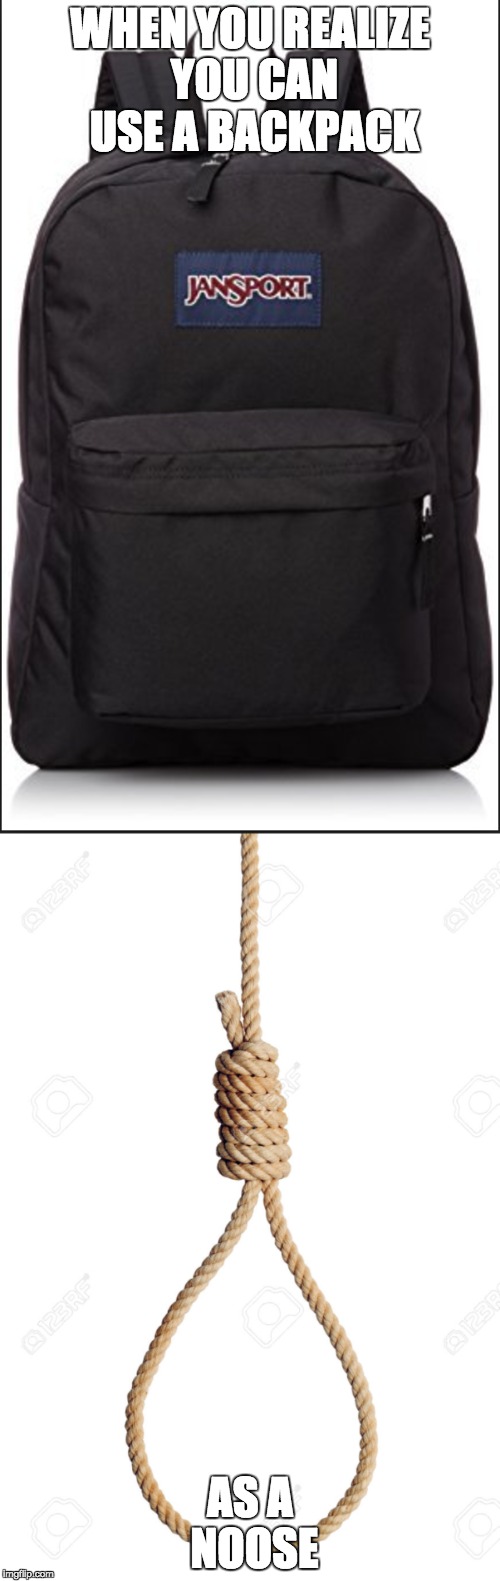 Back to school life hack!!!!!! | WHEN YOU REALIZE YOU CAN USE A BACKPACK; AS A NOOSE | image tagged in life hack,memes,funny,backpack,suicide | made w/ Imgflip meme maker